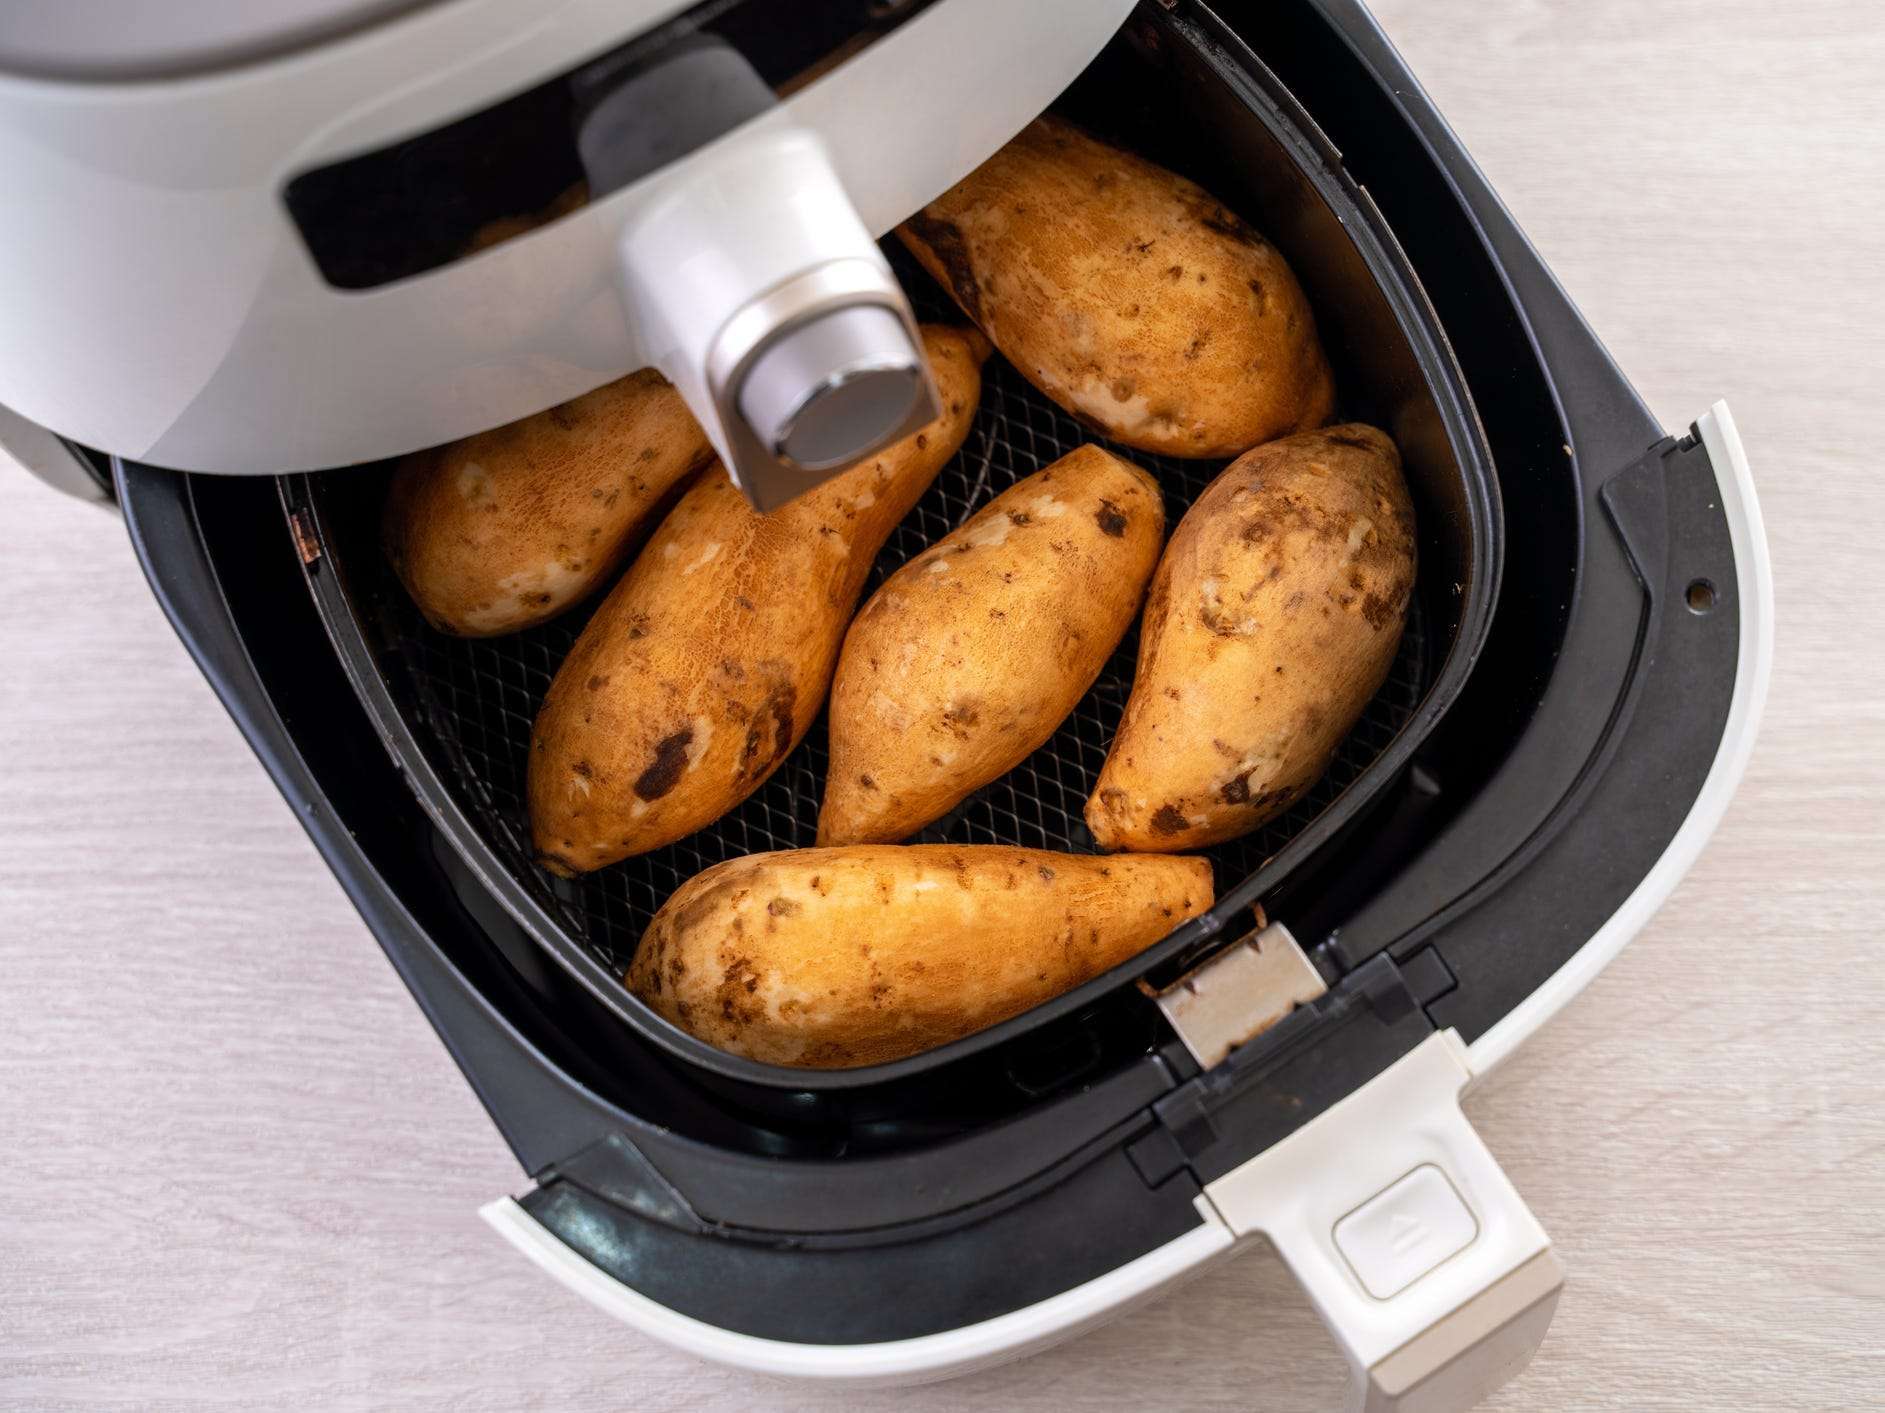 How to make baked potatoes in an air fryer | Business Insider India